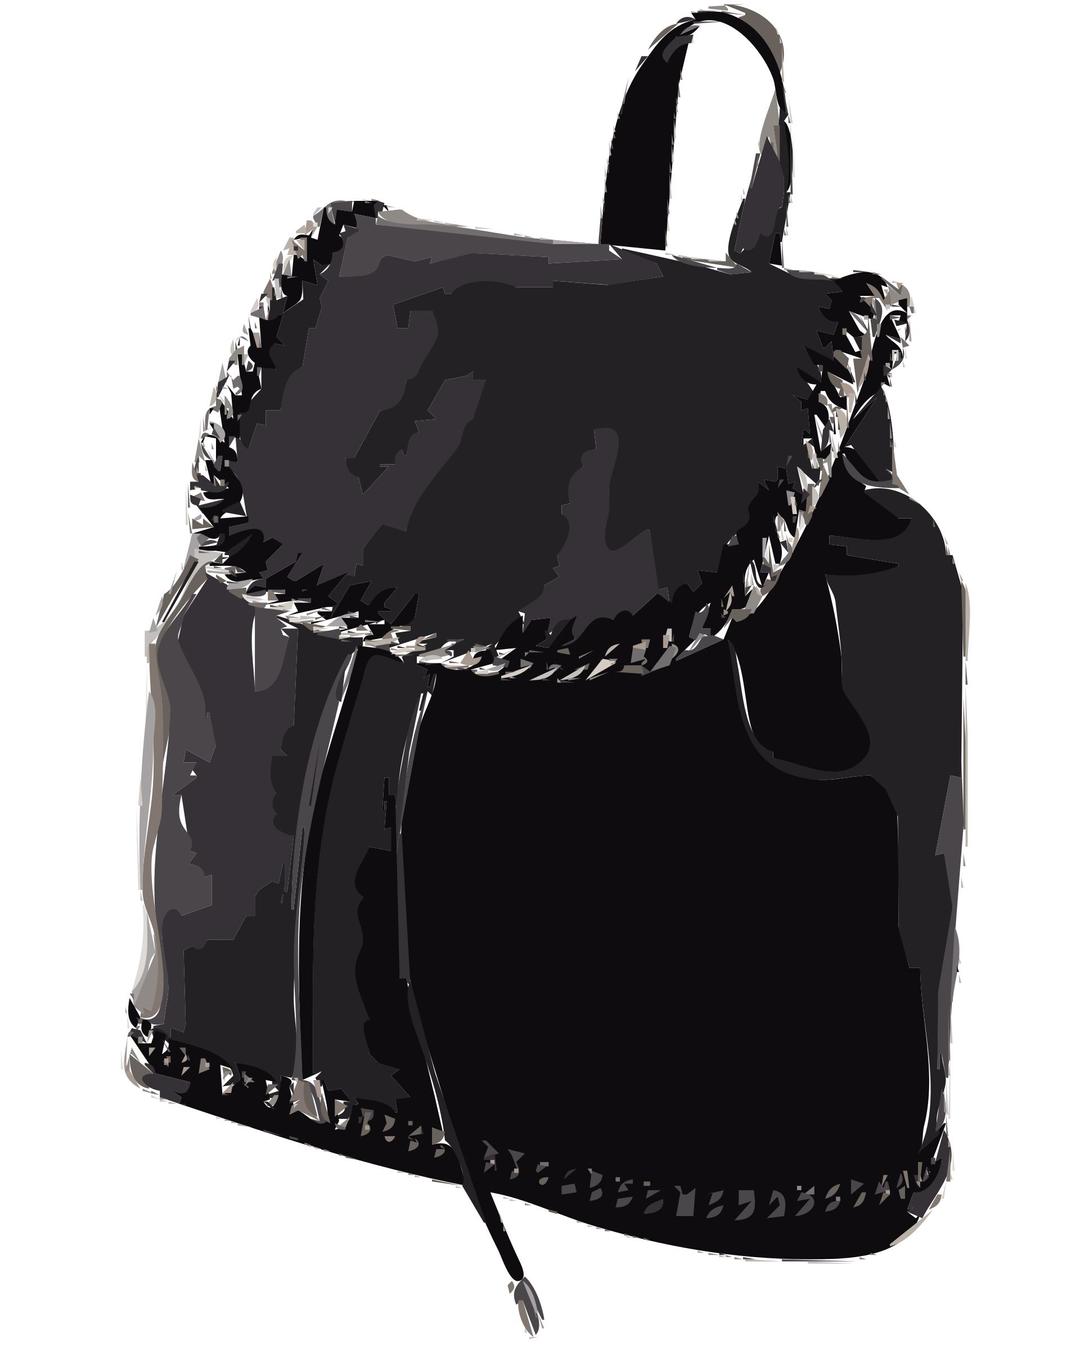 Black Leather Backpack without logo png transparent